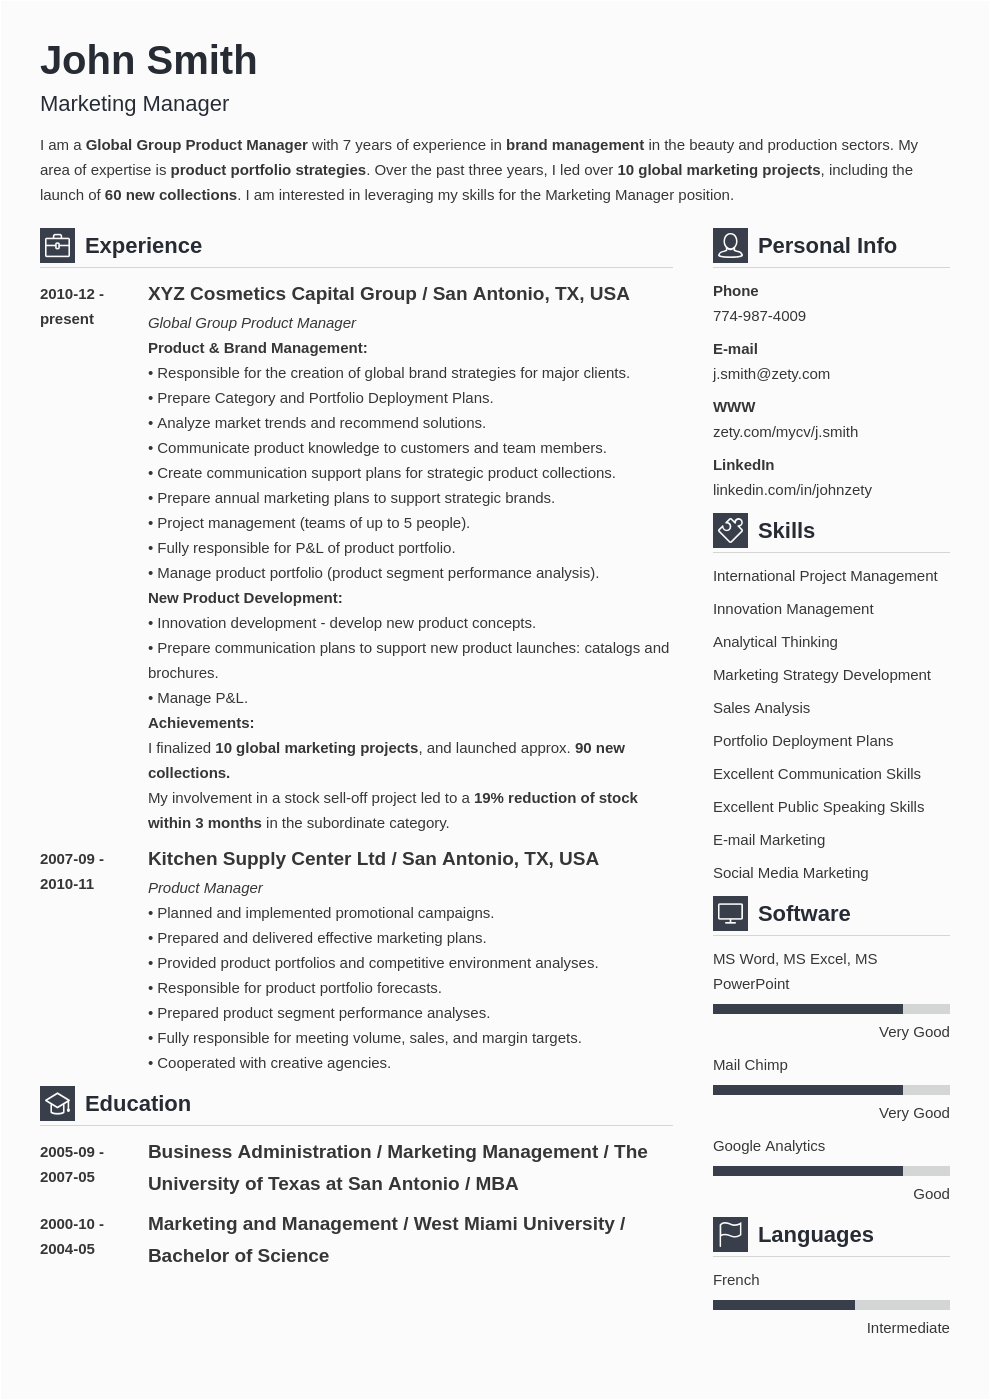 Sample Education Section Of A Resume How to List Education On A Resume Section Examples & Tips